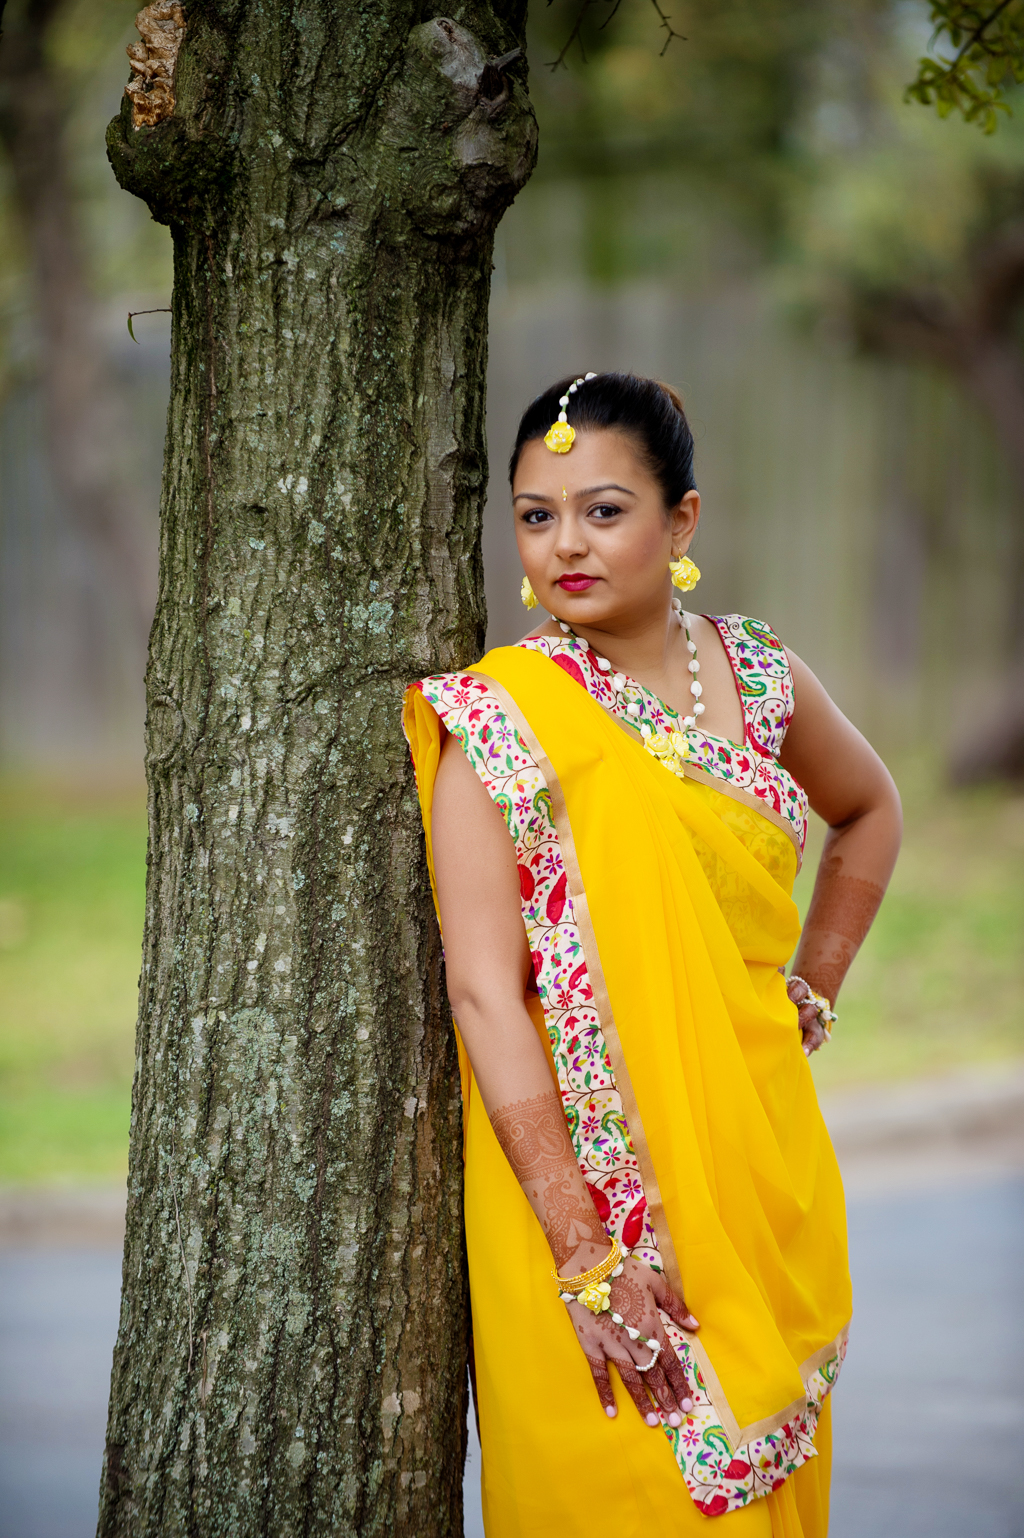 an indian bride dressed in a bright yellow sari leans against a tree